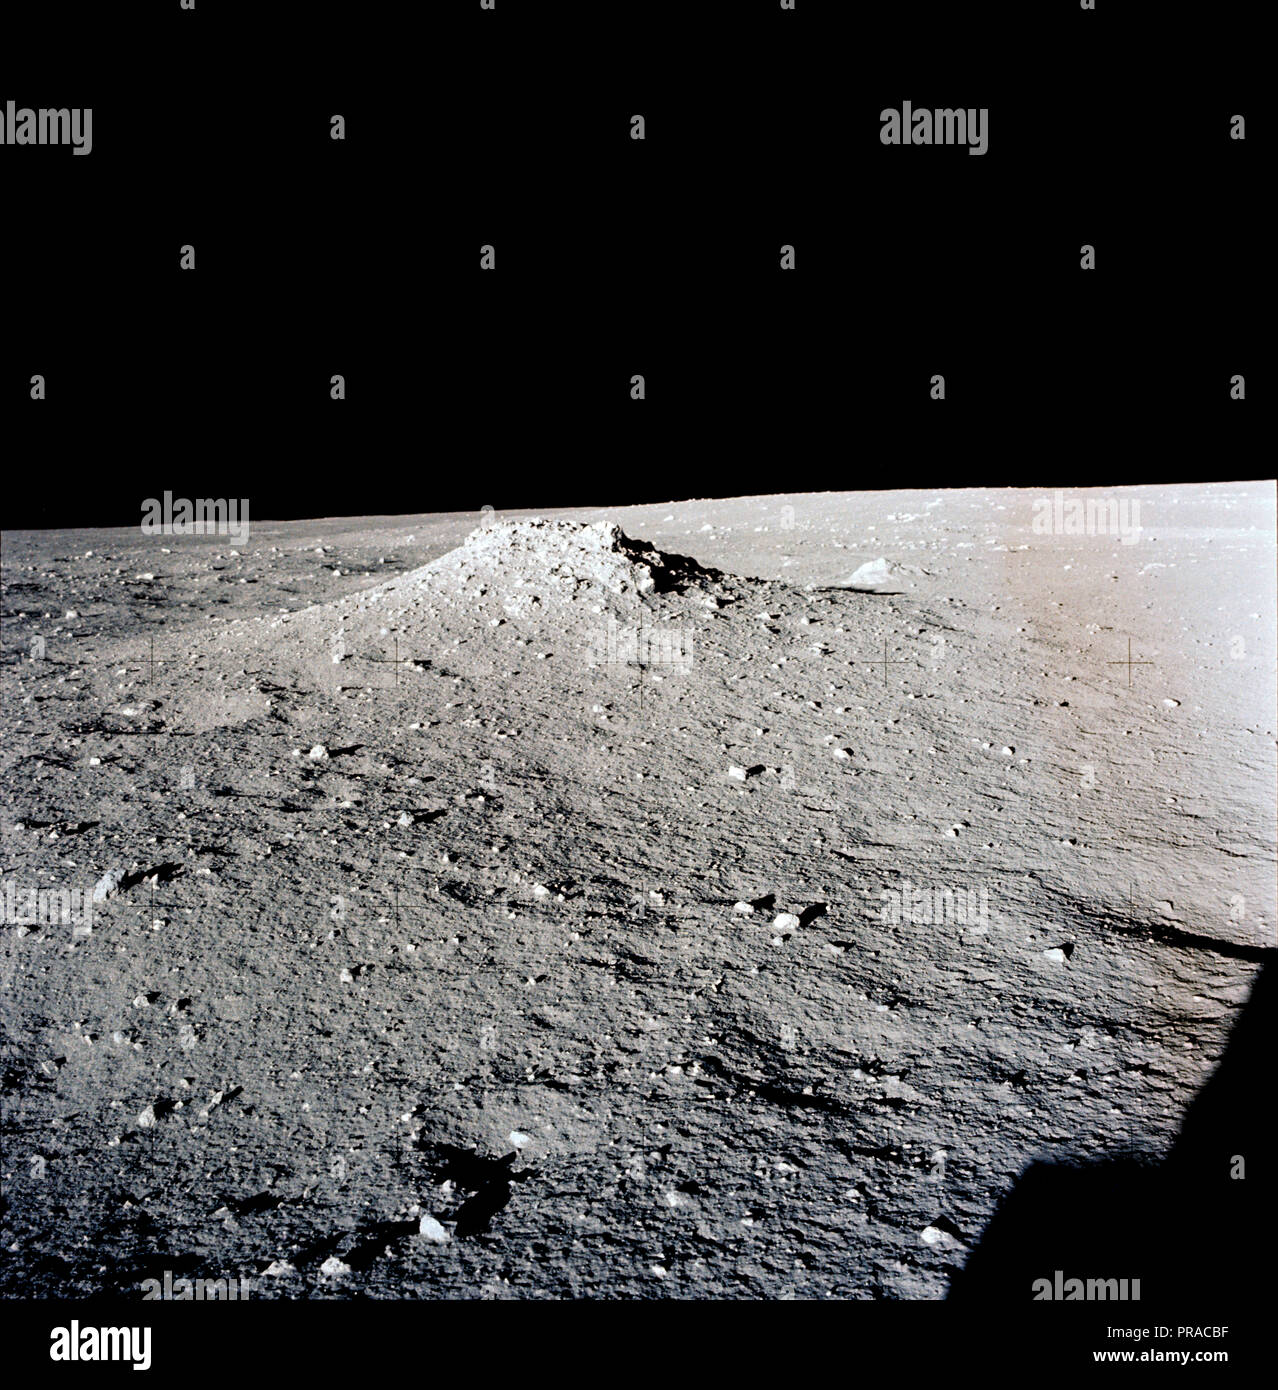 AS12-46-6795 (19-20 Nov. 1969) --- A view of the lunar surface in the vicinity of the Apollo 12 lunar landing site, photographed during the extravehicular activity (EVA) of astronauts Charles Conrad Jr., commander, and Alan L. Bean, lunar module pilot. Conrad and Bean encountered the odd, anthill-shaped mound during their lunar traverse. The two descended in the Apollo 12 Lunar Module (LM) to explore the moon, while astronaut Richard F. Gordon Jr., command module pilot, remained with the Command and Service Modules (CSM) in lunar orbit. Stock Photo